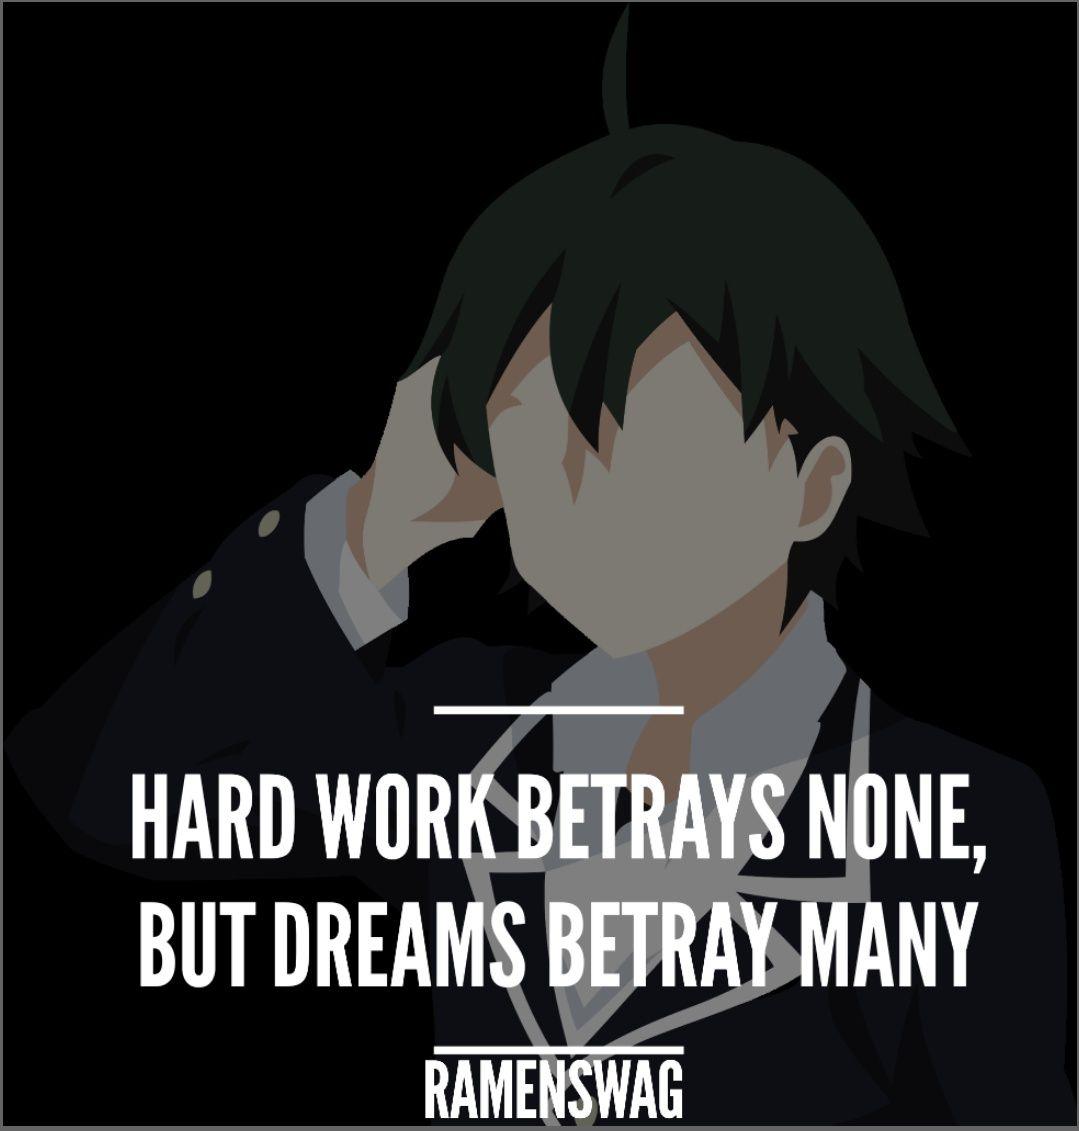 Hikkigaya Hachiman Quotes For Every Loner!. Quotes, Loner